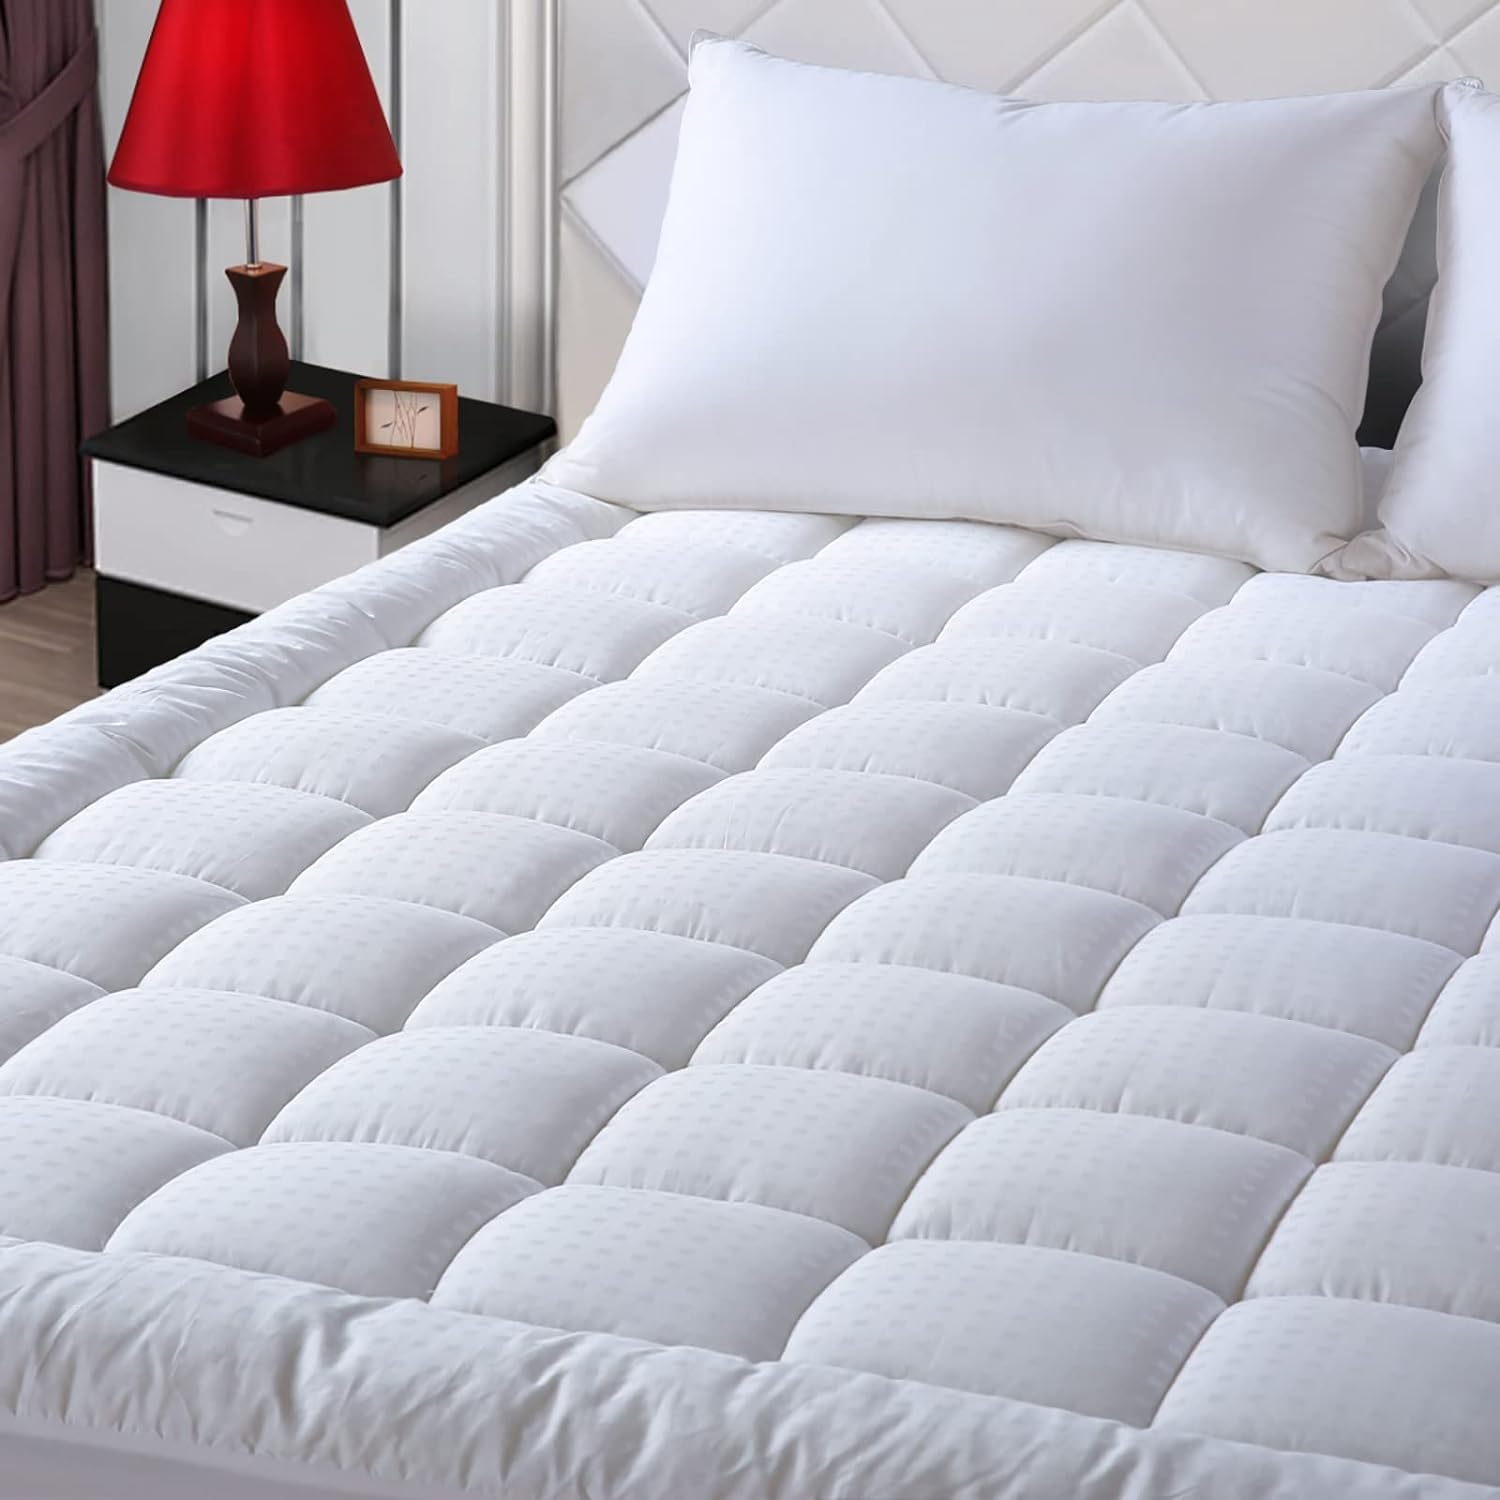 EASELAND Queen Size Mattress Pad Pillow Cover Quilted Fitted Mattress Protector Cotton Top 8-21 Deep Pocket Cooling Mattress Topper (60x80 Inches, White)